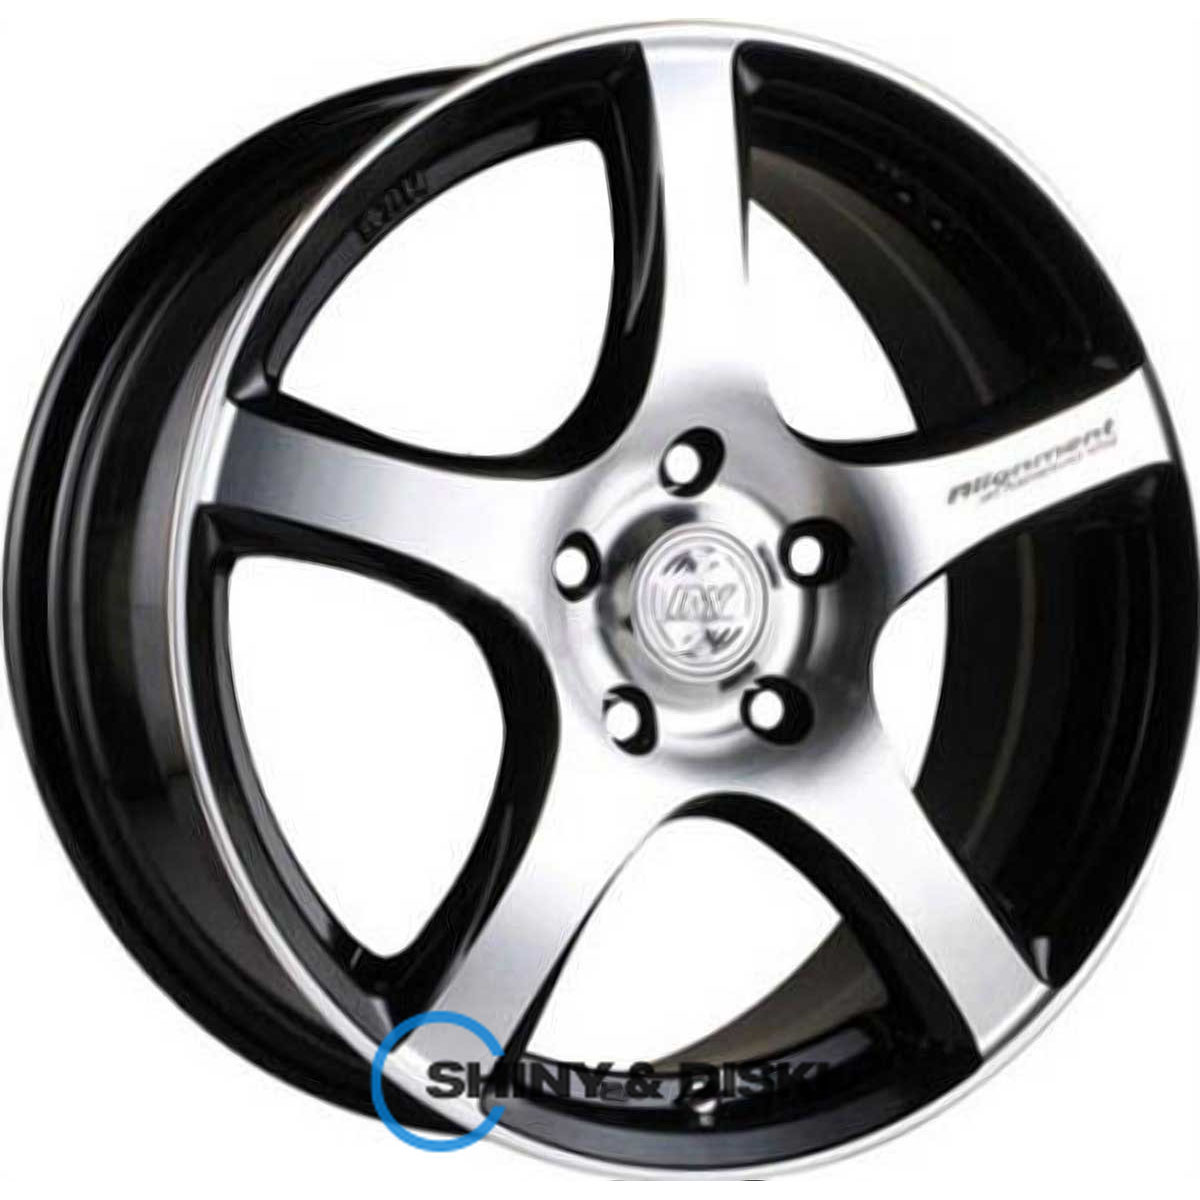 rs tuning h-531 bkfp r16 w7 pcd5x114.3 et40 dia67.1